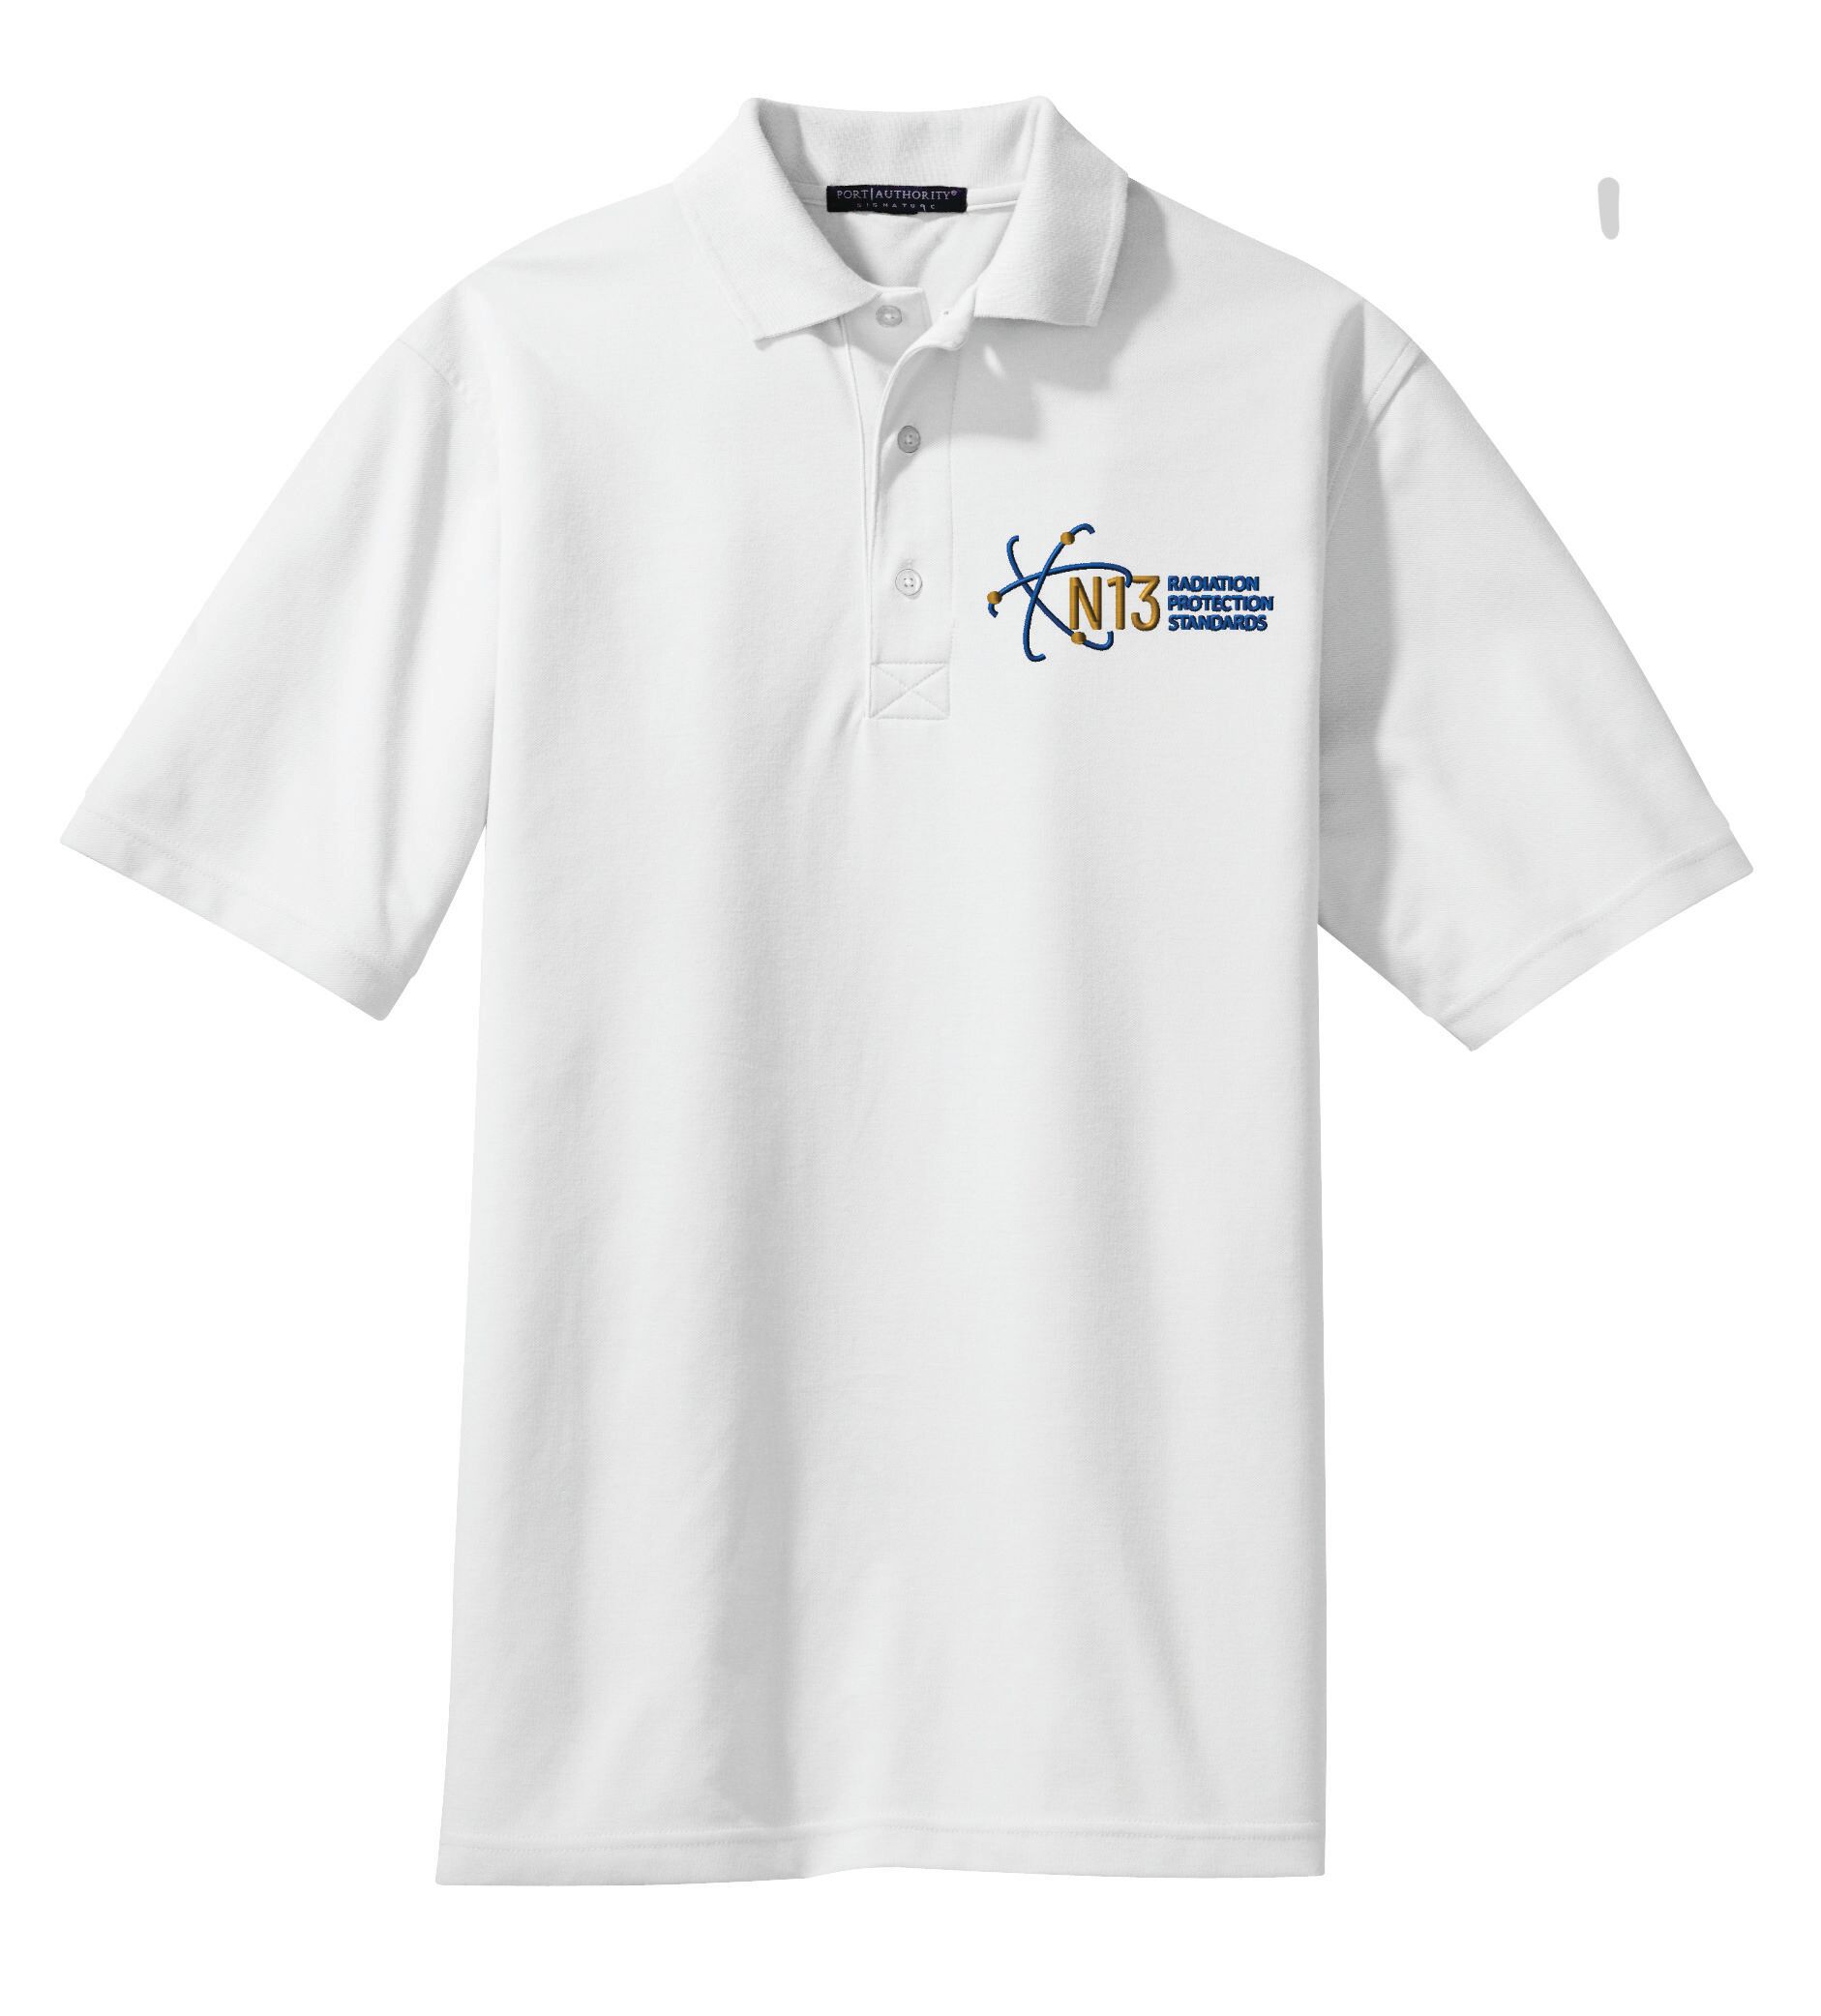 N13 Radiation Protection Standards Polo Shirts